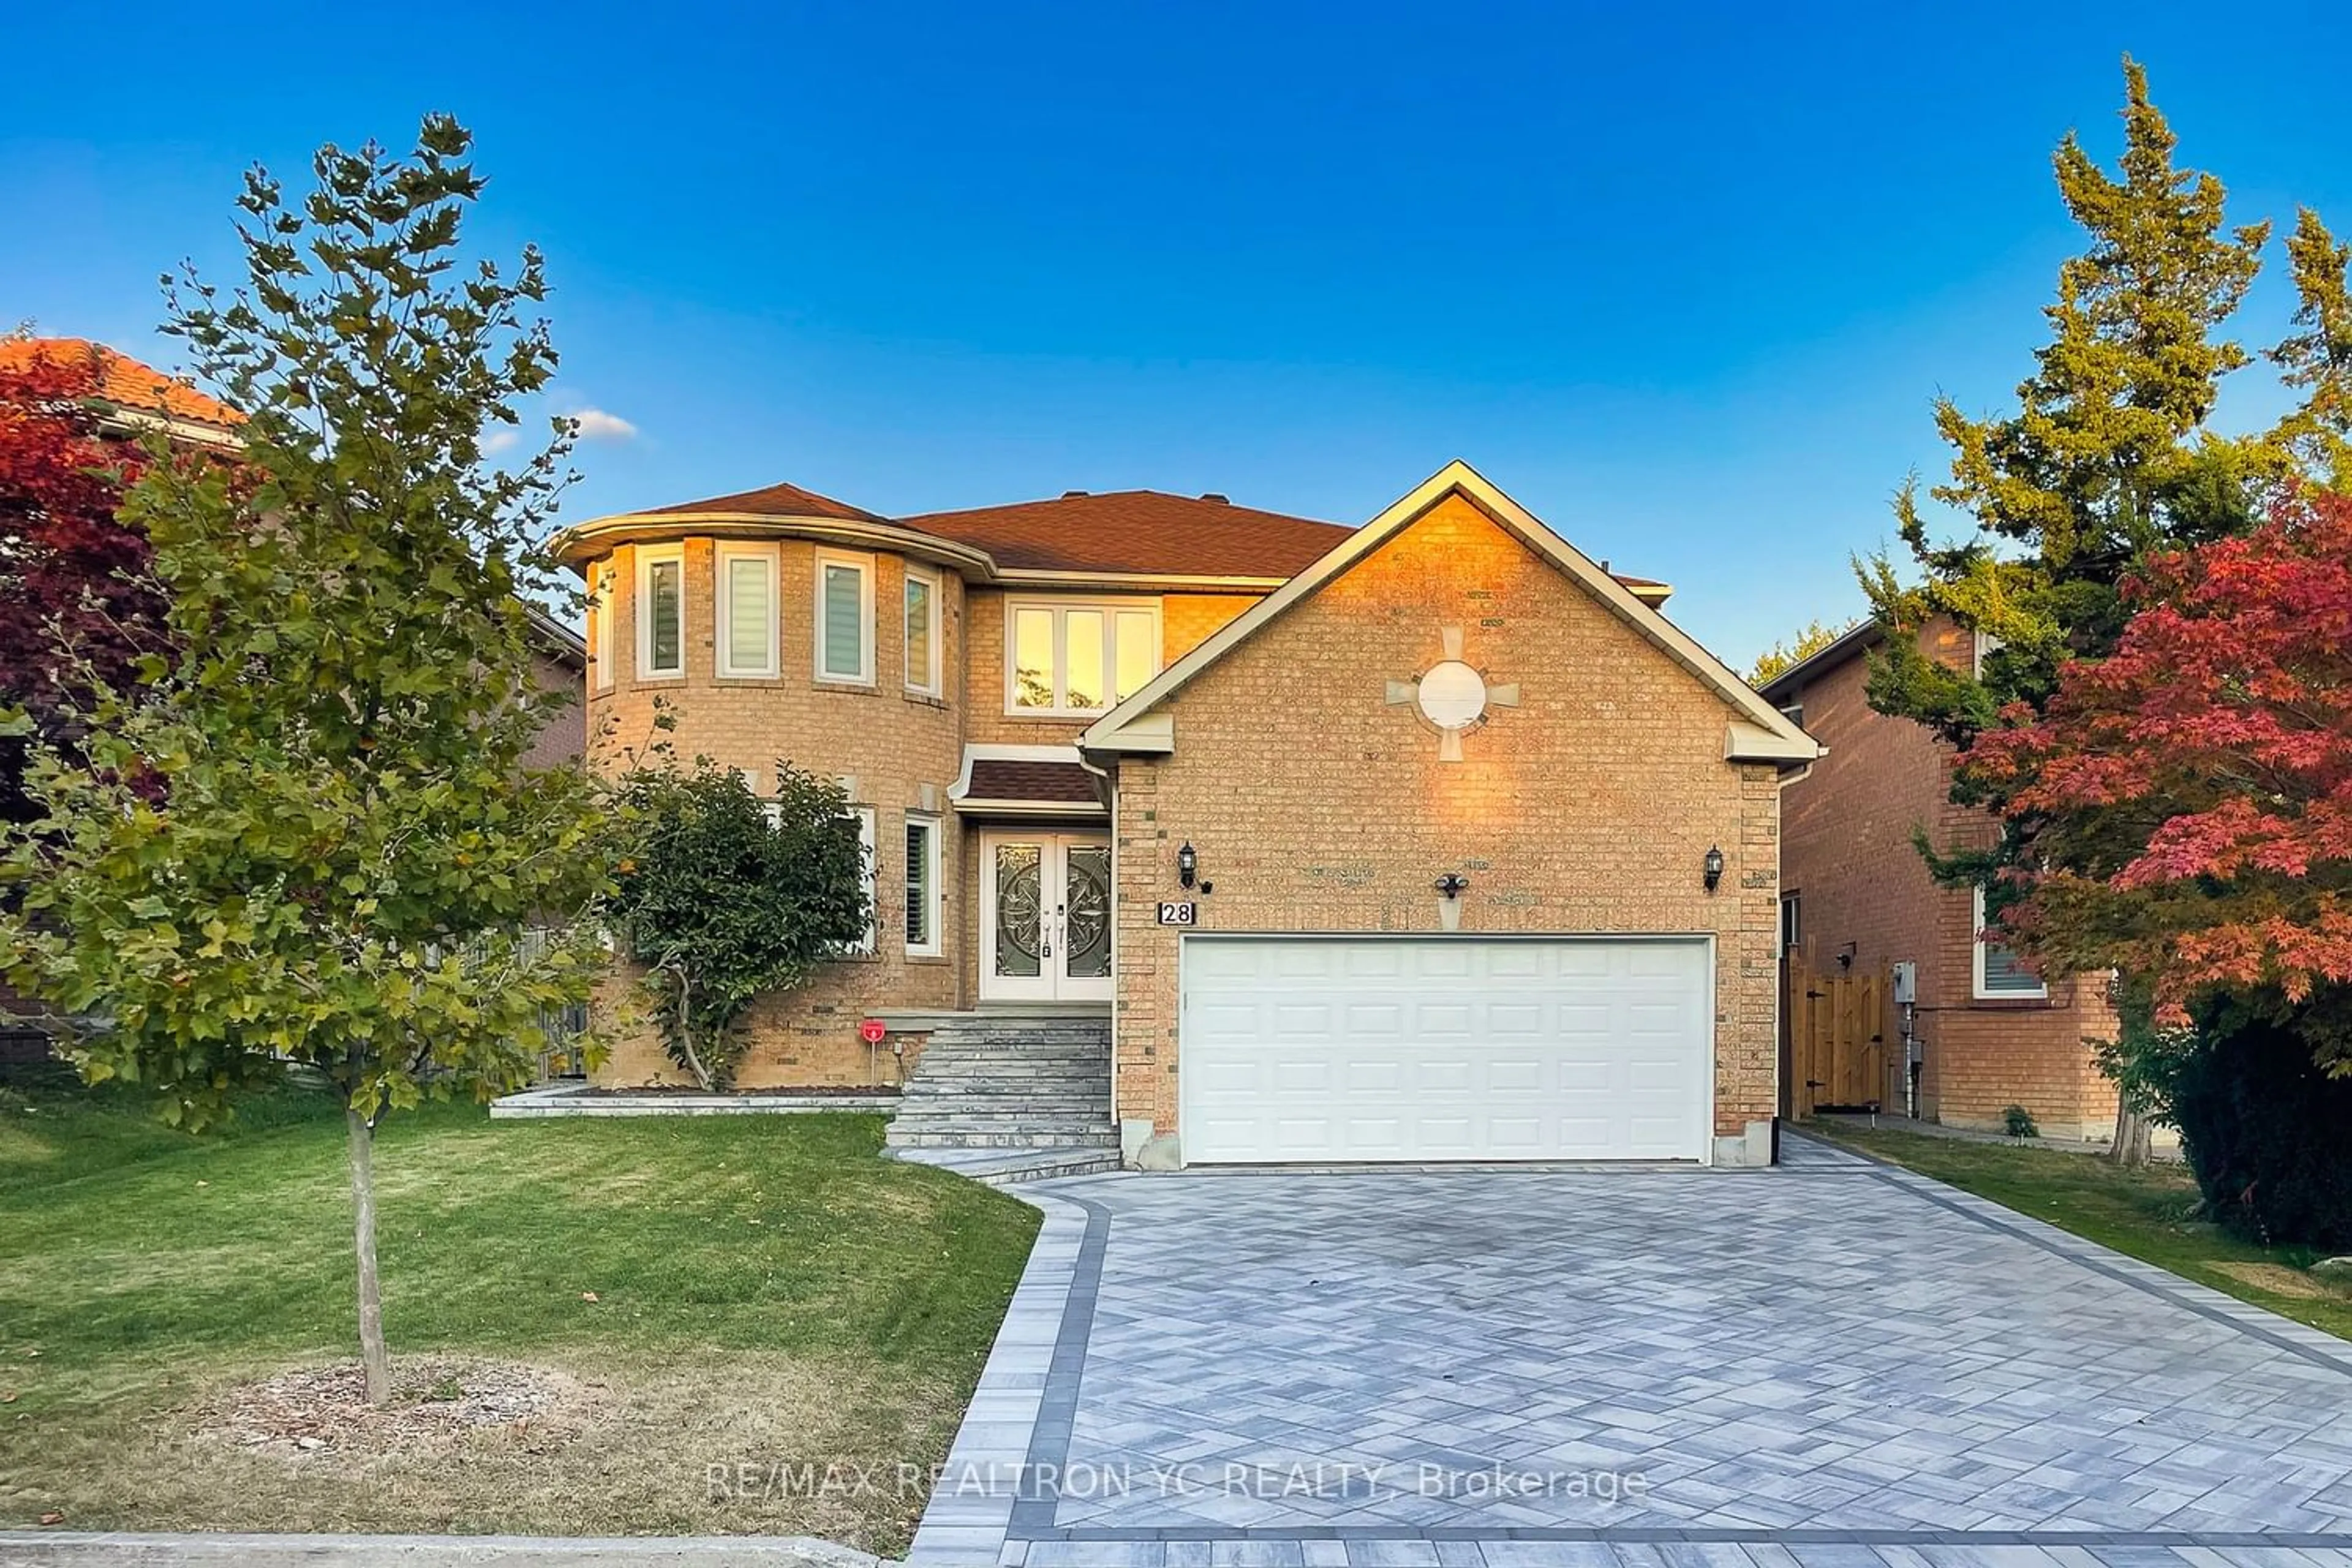 Home with brick exterior material for 28 Laser Crt, Richmond Hill Ontario L4B 1R9